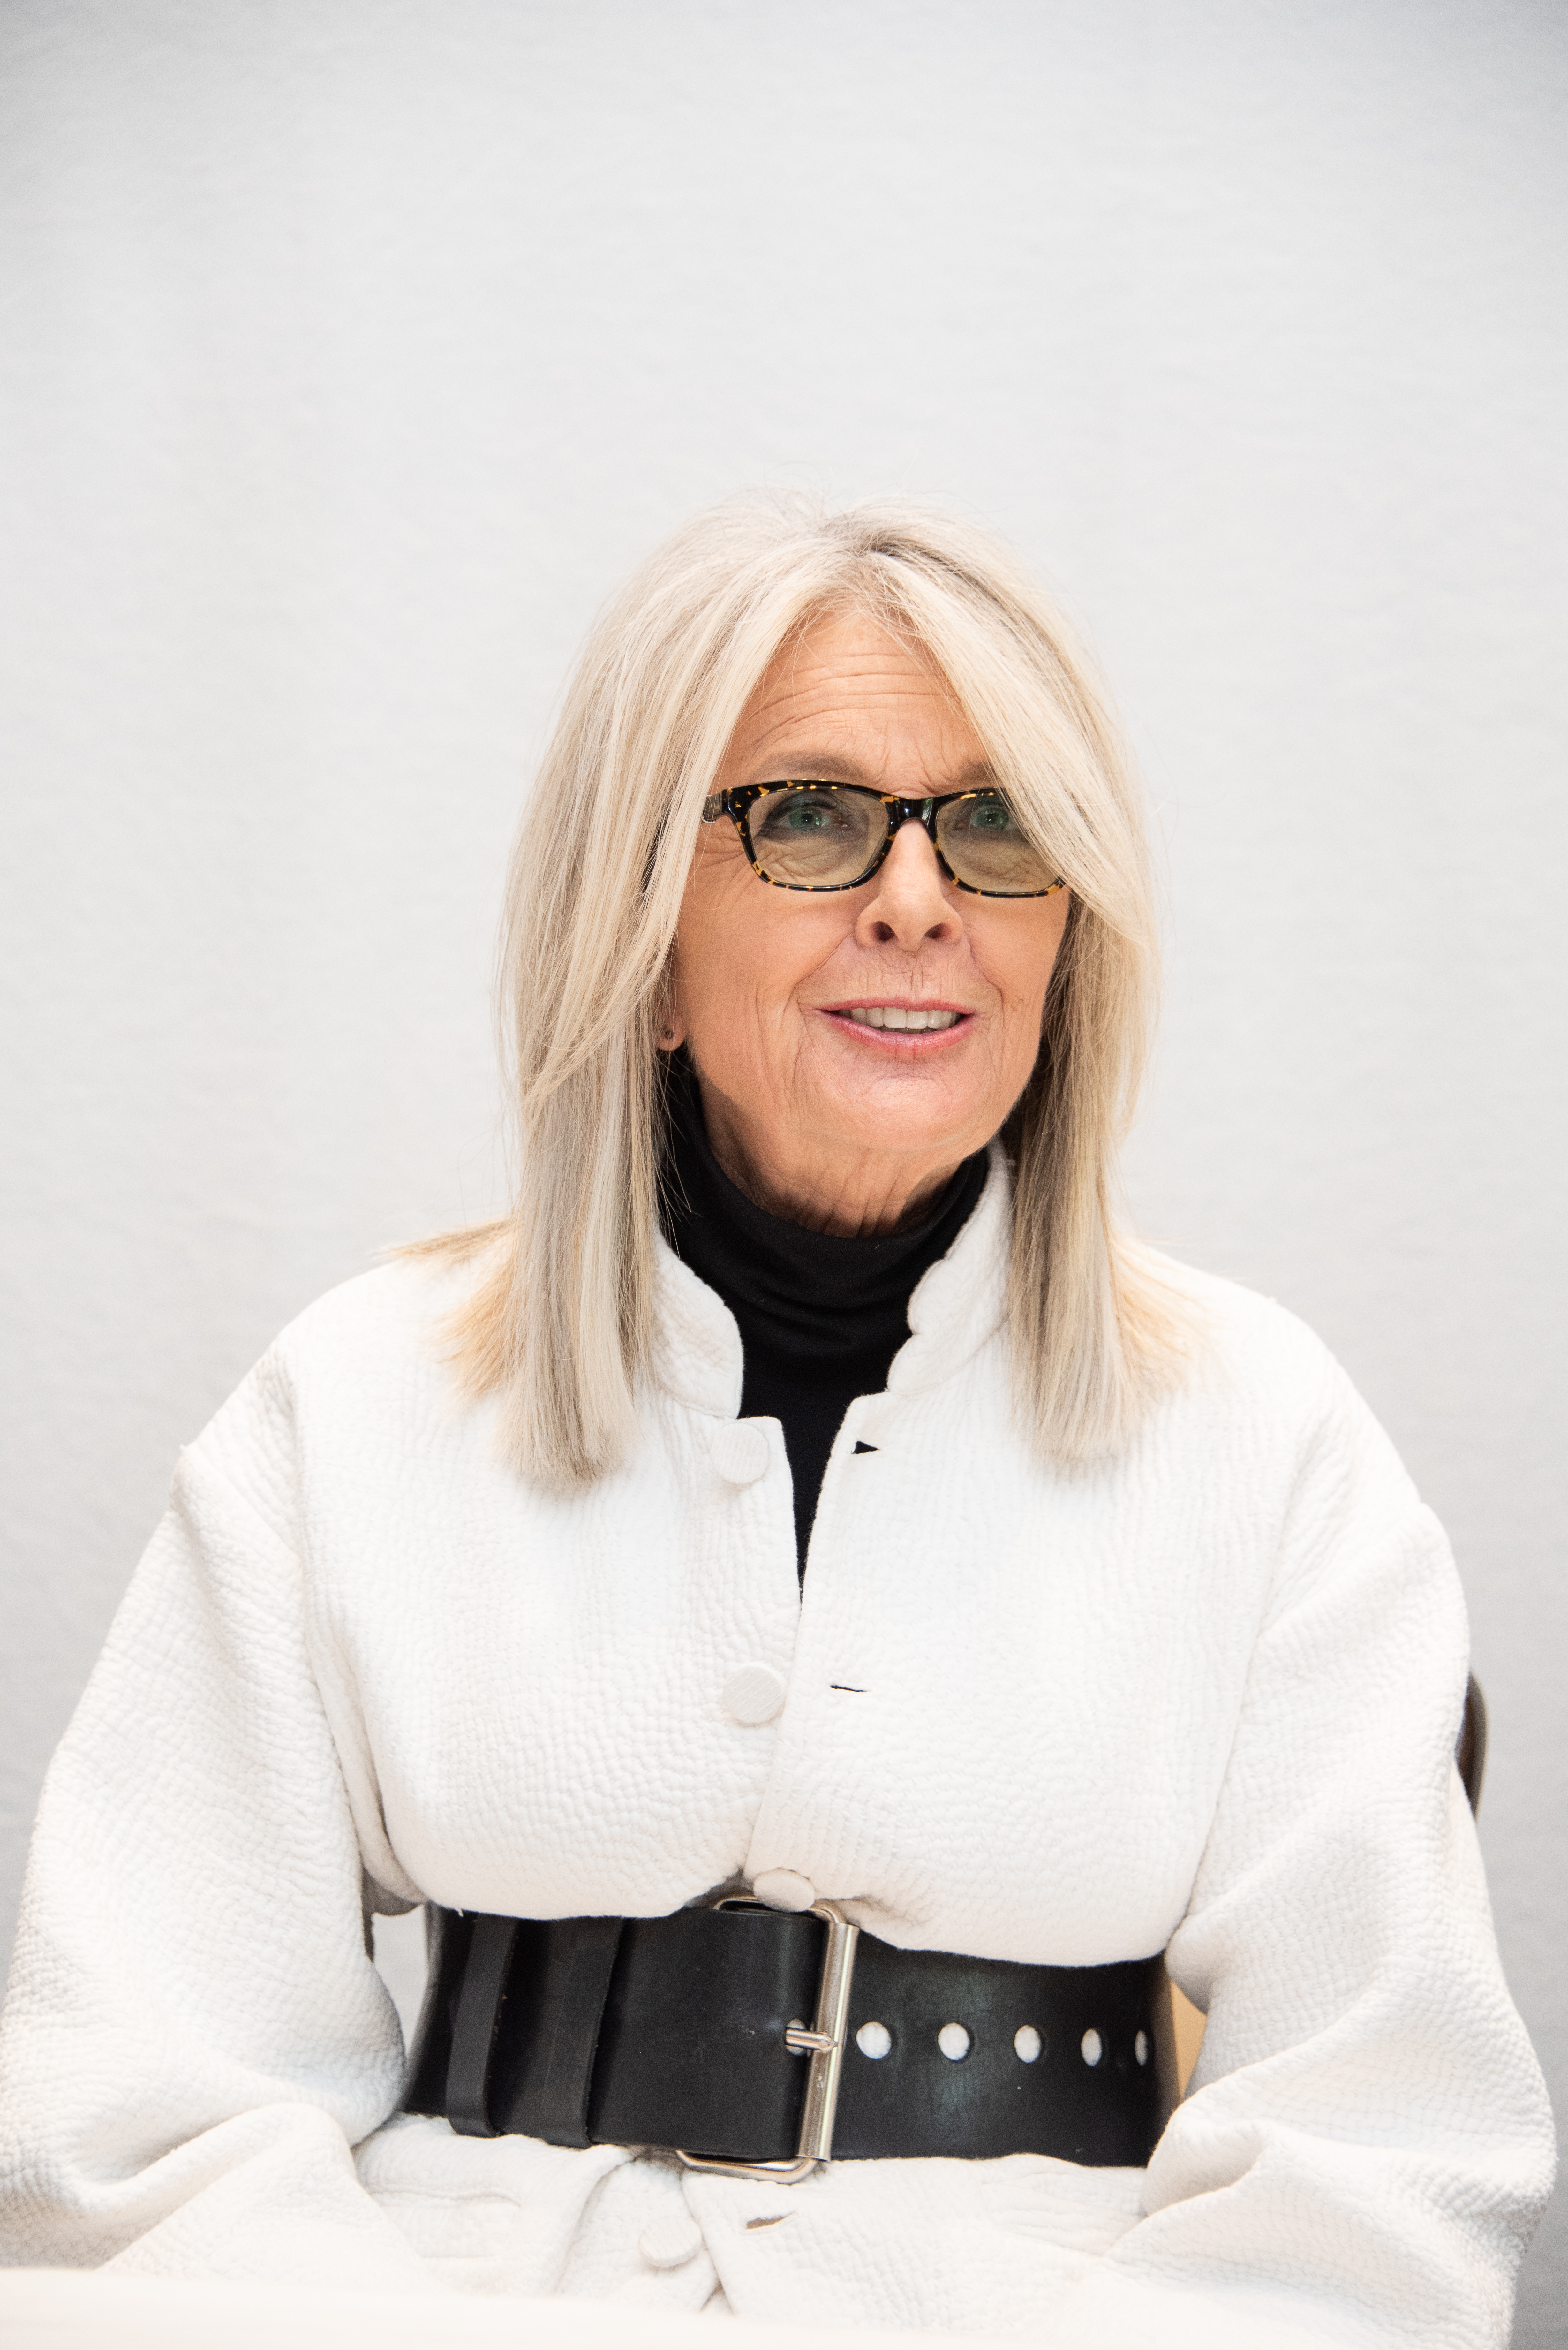 Diane Keaton at the "Poms" Press Conference at the Four Seasons Hotel on May 2, 2019 in Beverly Hills, California | Source: Getty Images